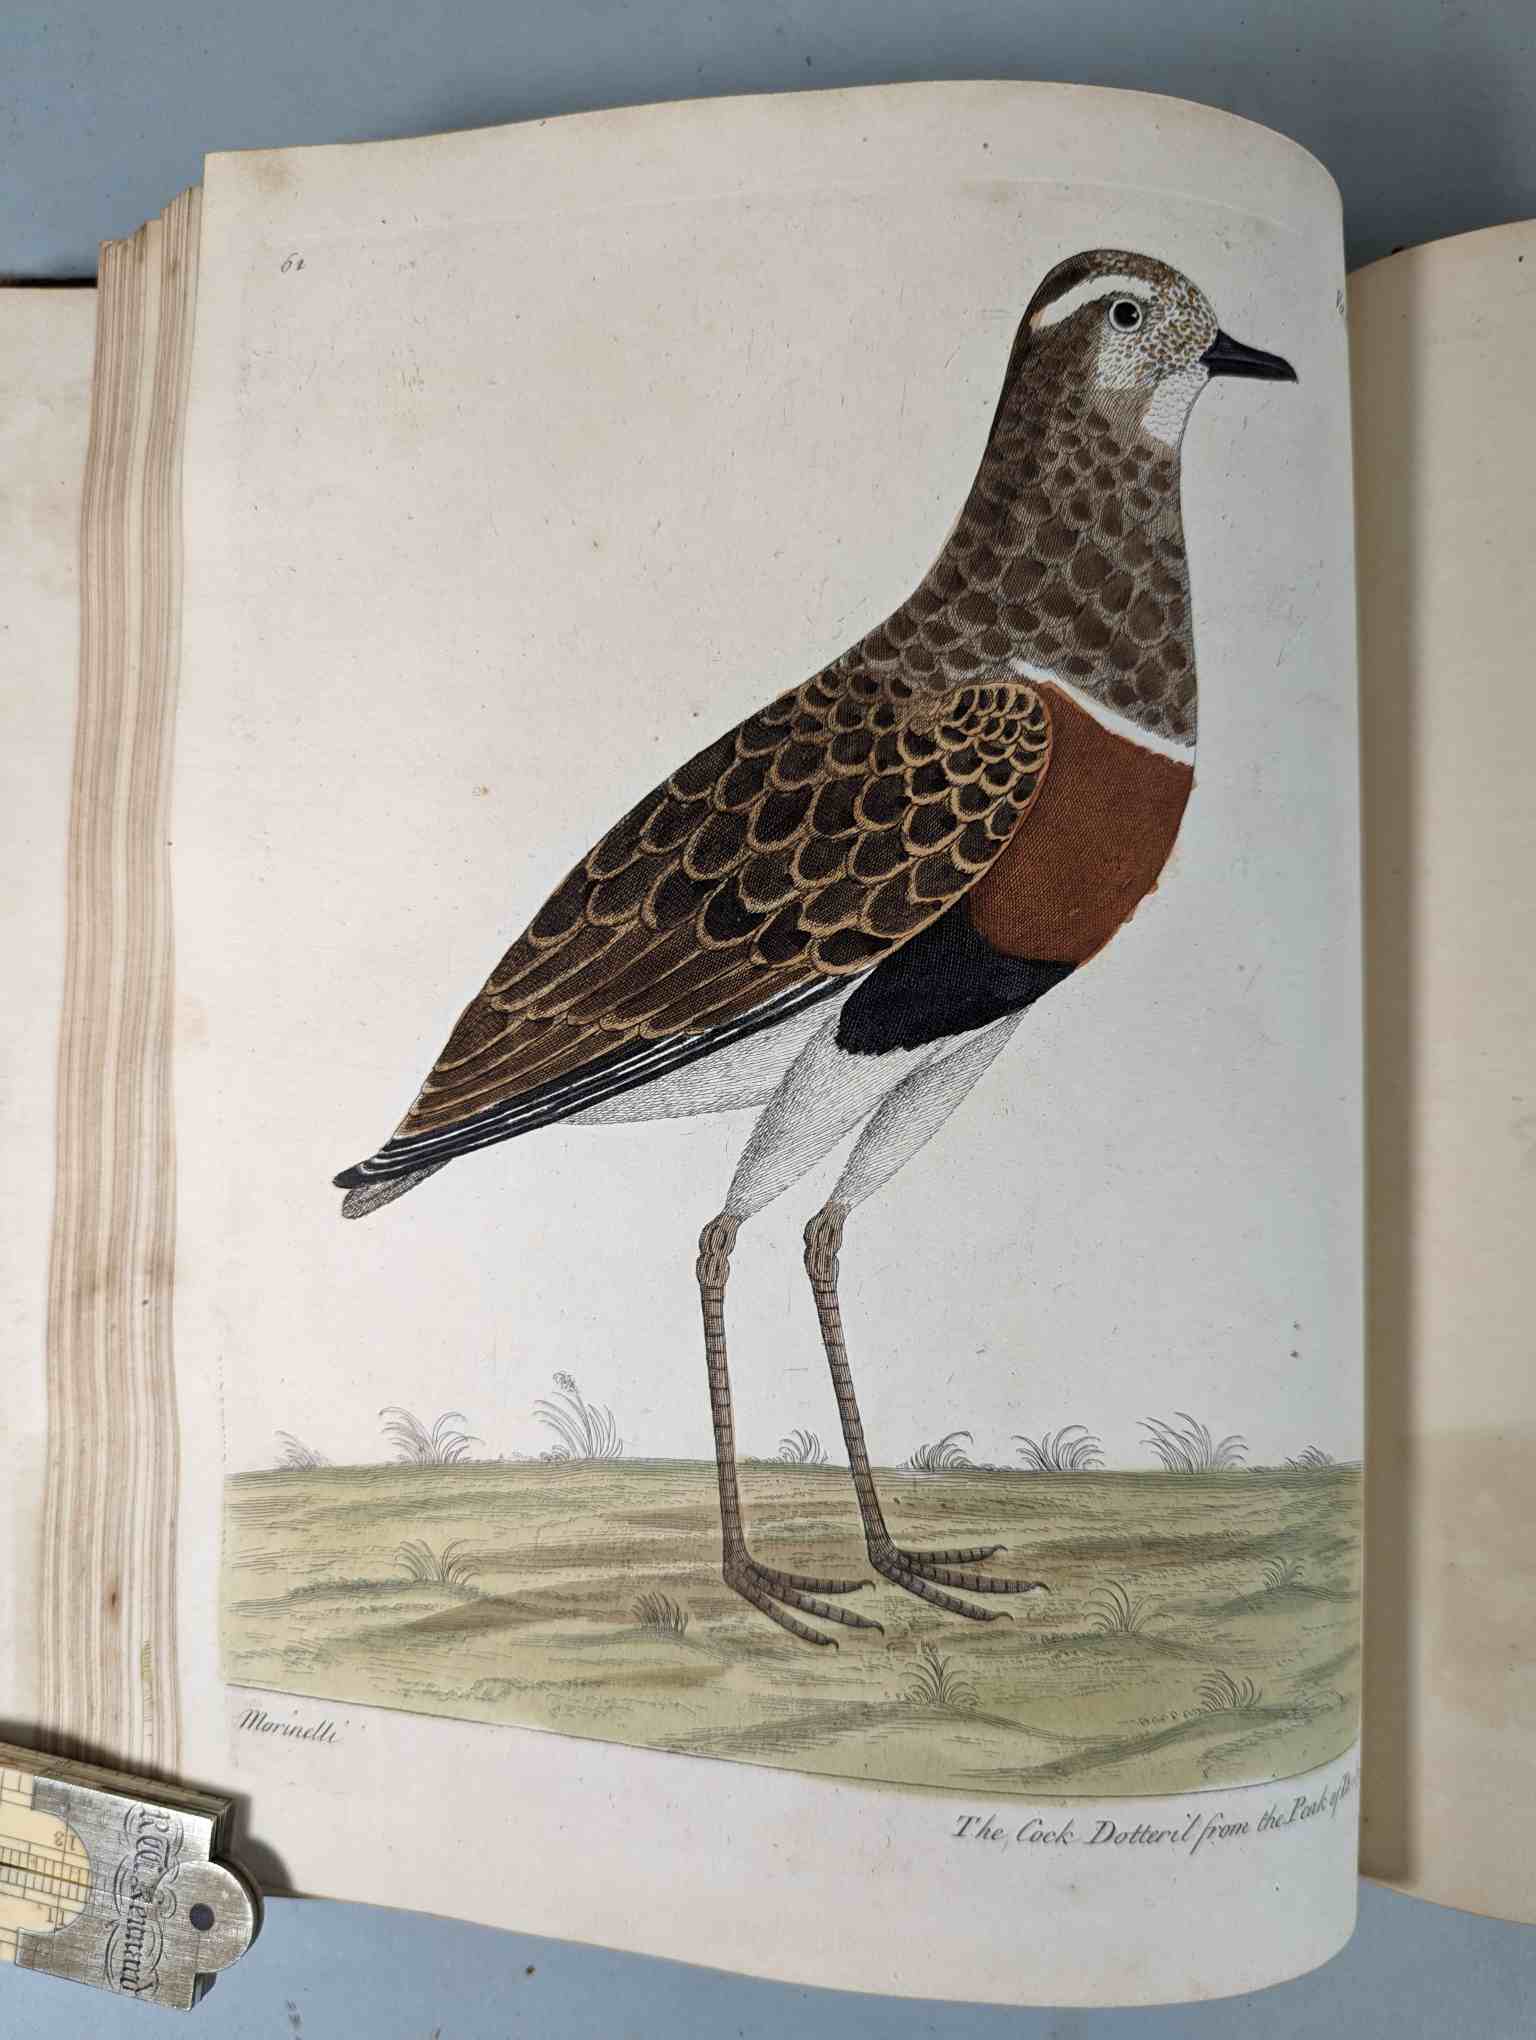 ALBIN, Eleazar. A Natural History of Birds, to which are added, Notes and Observations by W. - Image 165 of 208